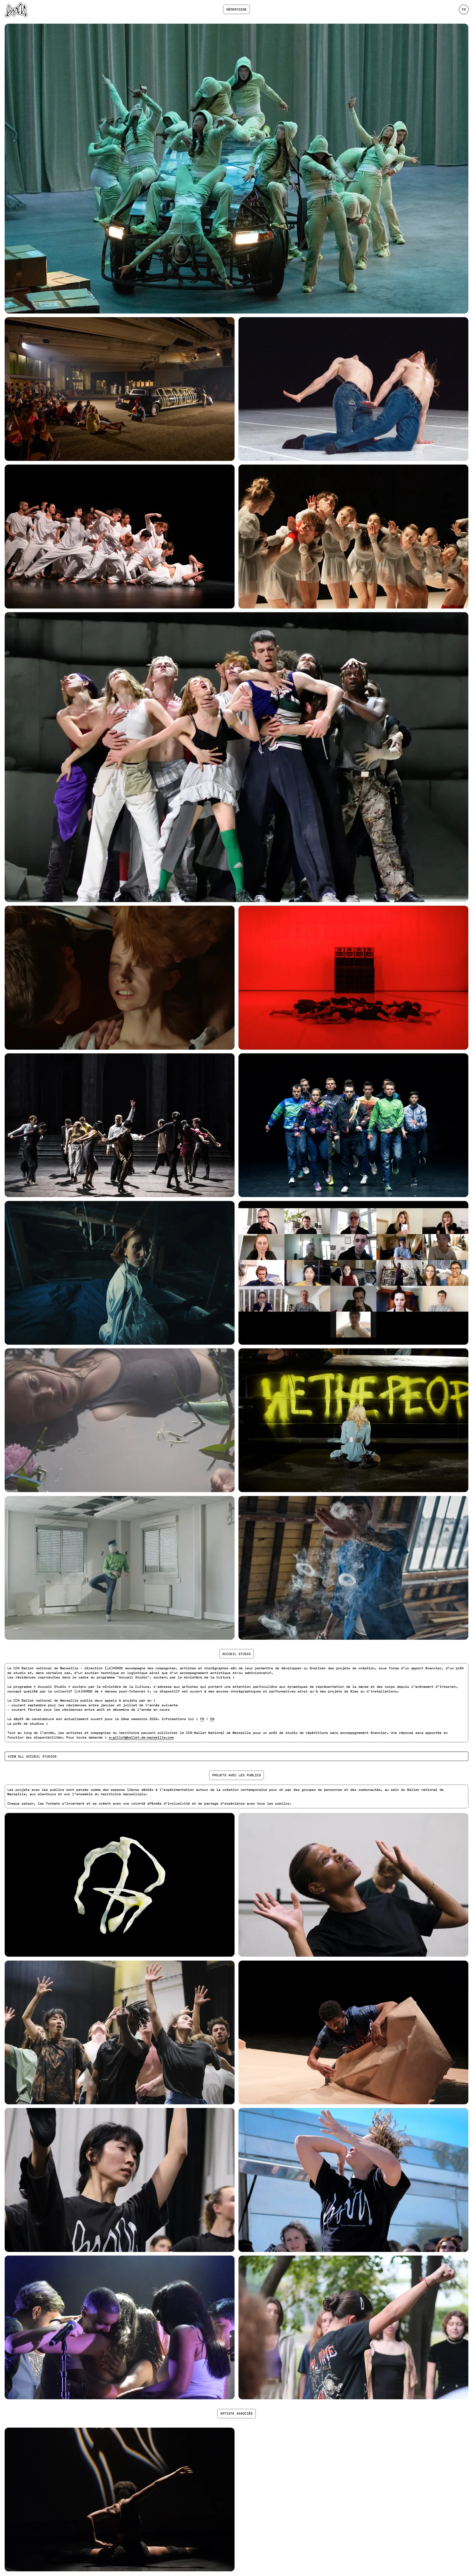 Ballet De Marseille Landing Page Example: For (LA)HORDE, the Ballet is a safe space, a place focused on youth and young artists, where to think about new dynamics of representation and circulation of artistic forms. In their transdisciplinary creations, they question what ballet is in the digital age and constantly reflect on the major political issues that mark our time: diversity, inclusiveness and openness to bodies and practices to which institutional and heritage places do not yet provide sufficient visibility.